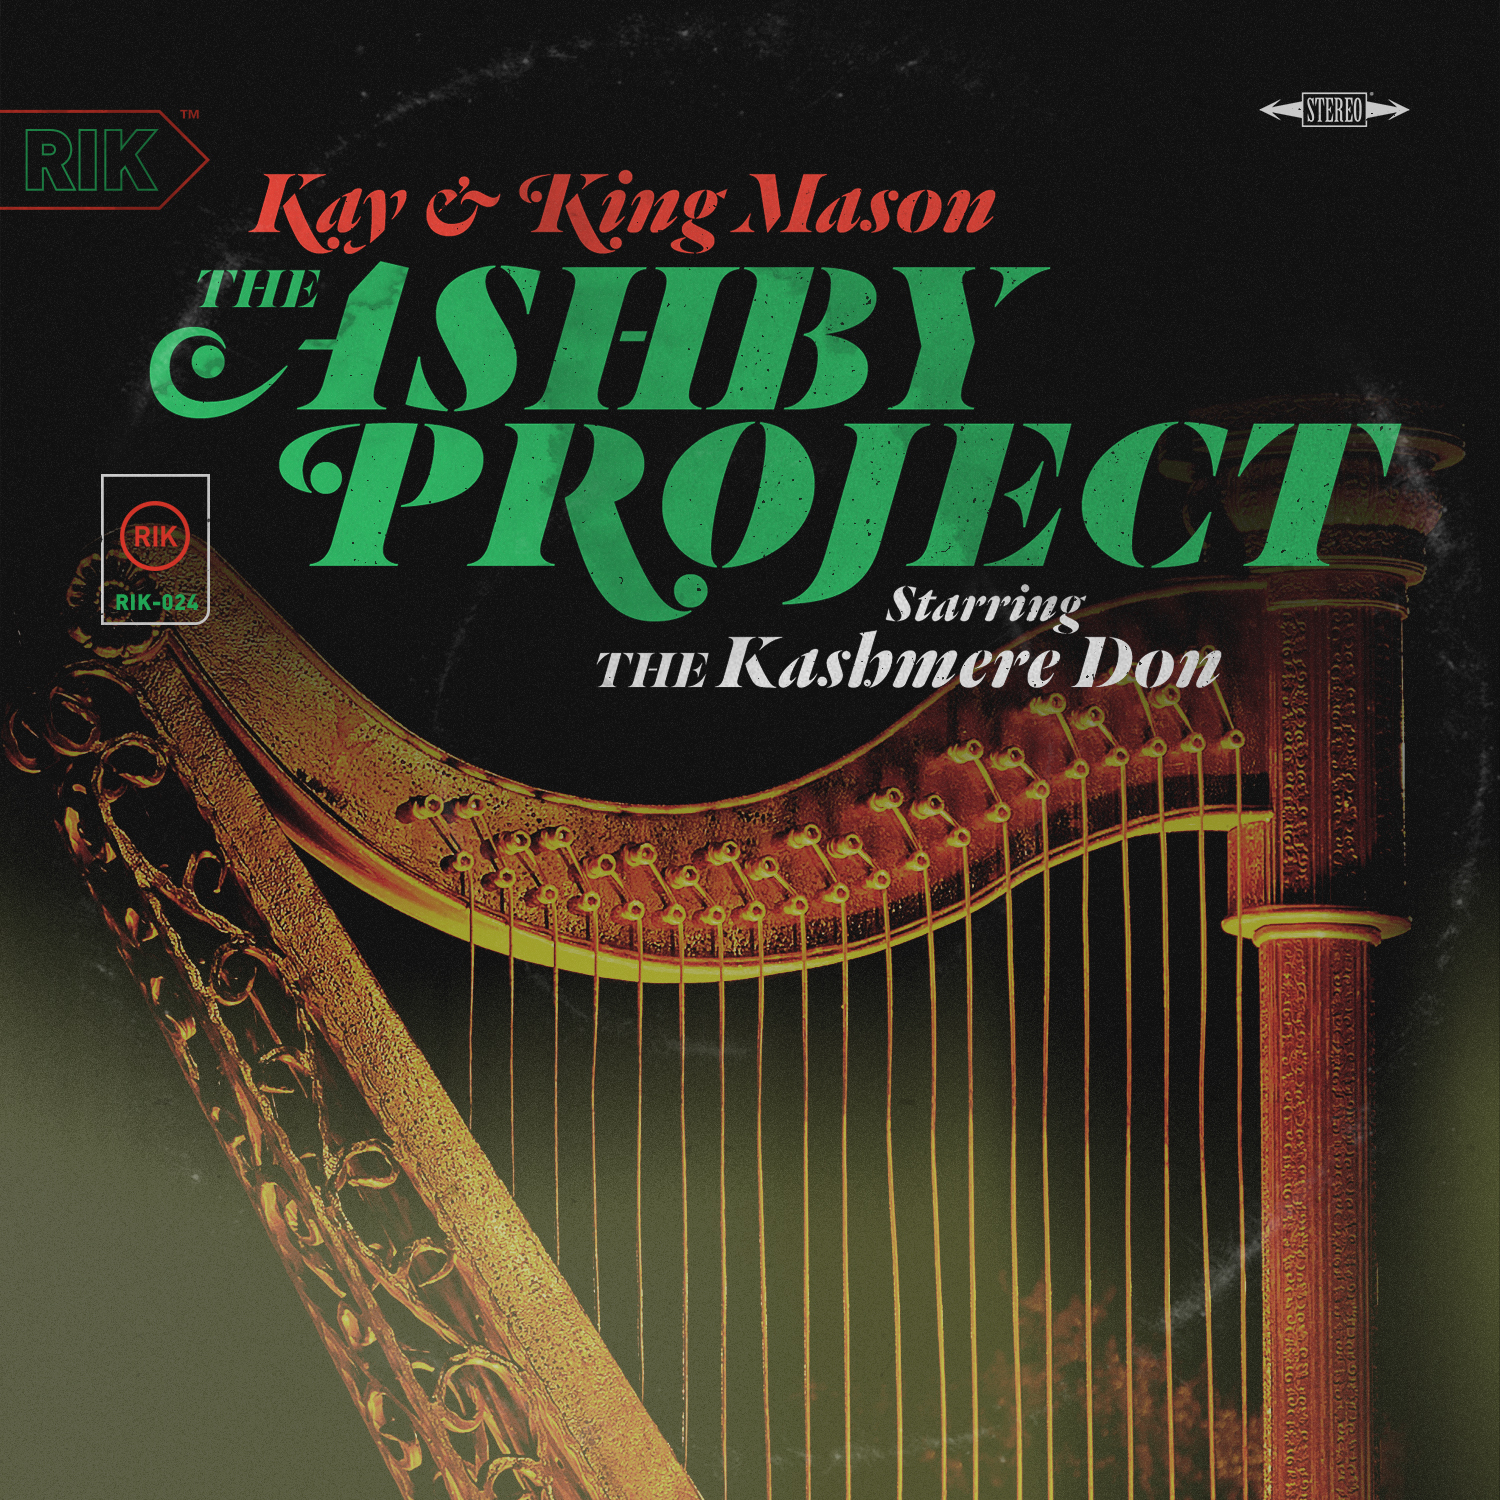 New Release: Kay & King Mason — The Ashby Project Starring The Kashmere Don